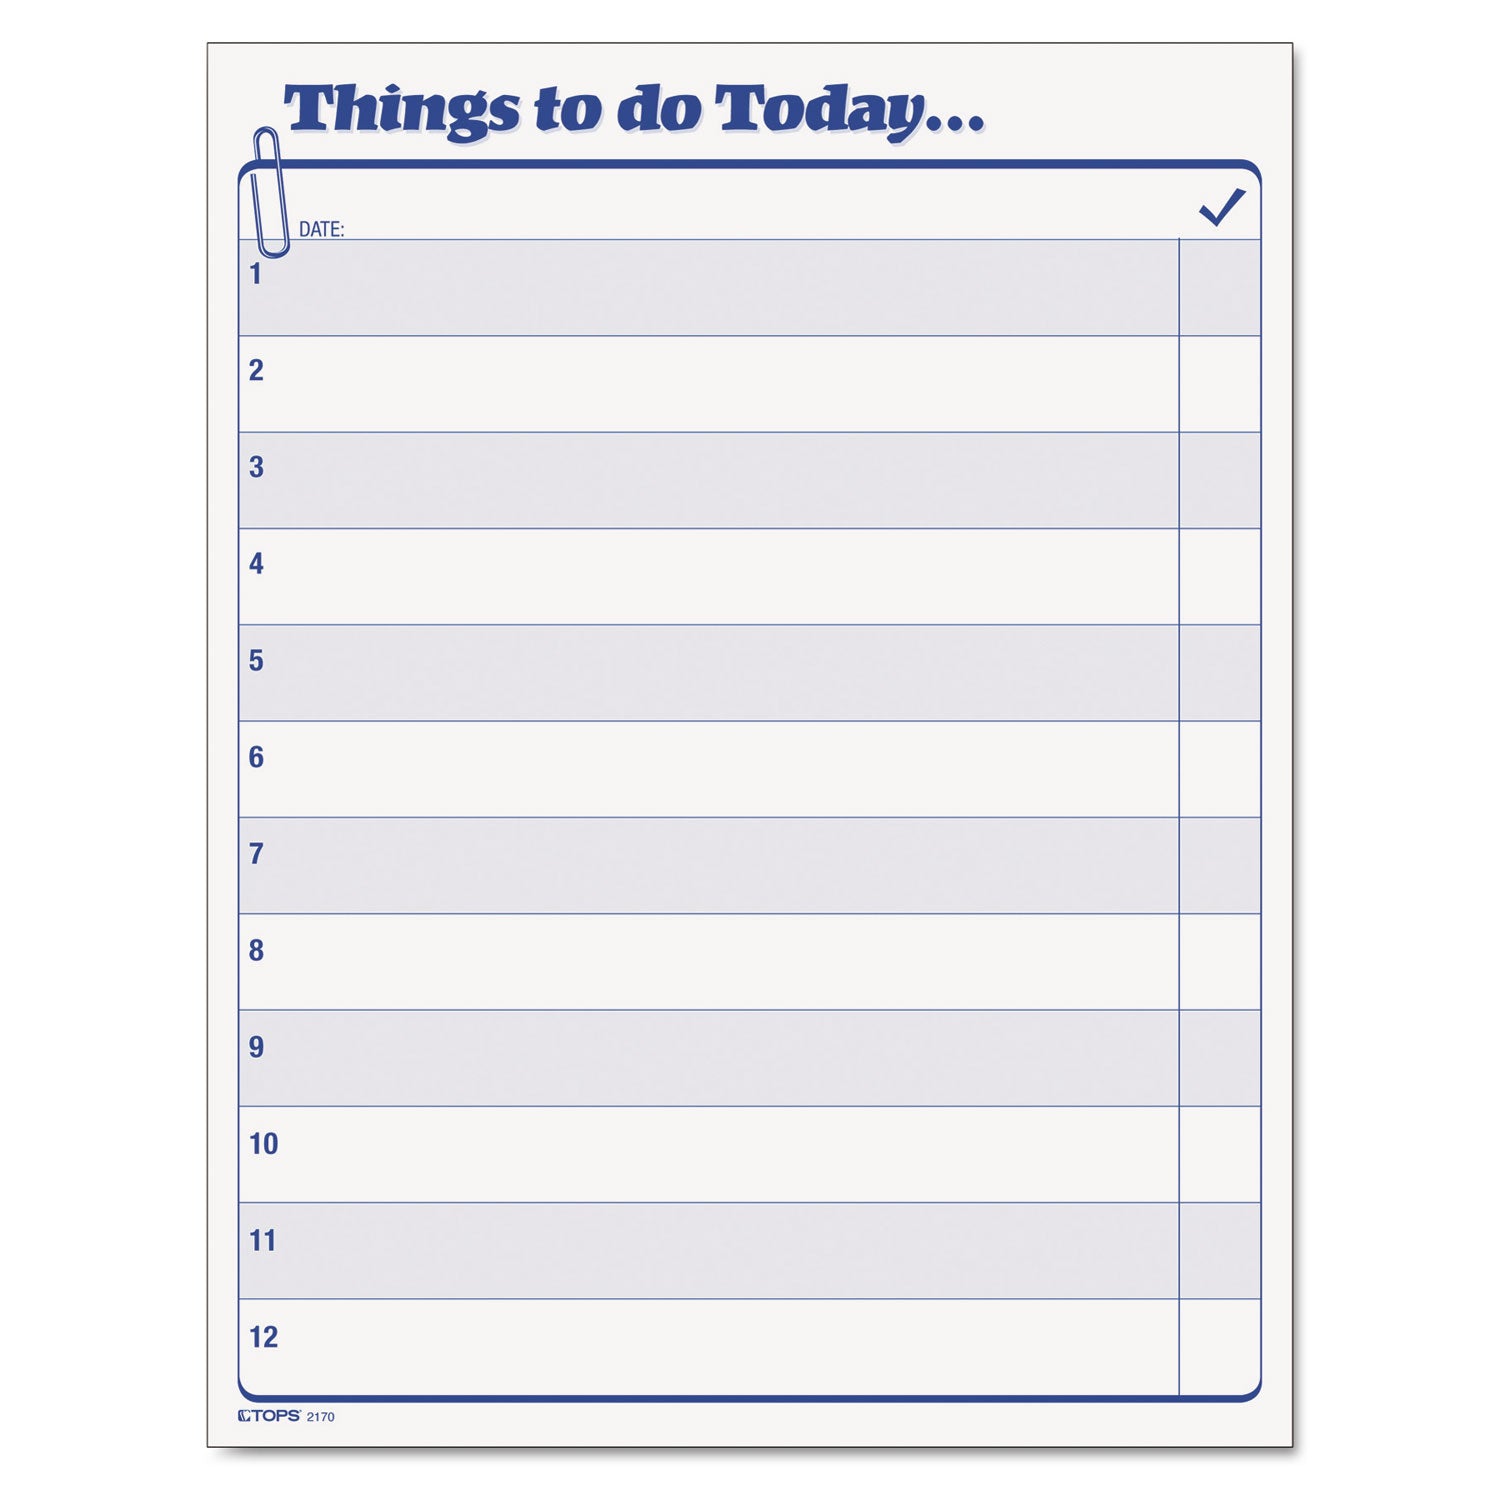 Things To Do Today" Daily Agenda Pad, One-Part (No Copies), 8.5 x 11, 100 Forms Total - 